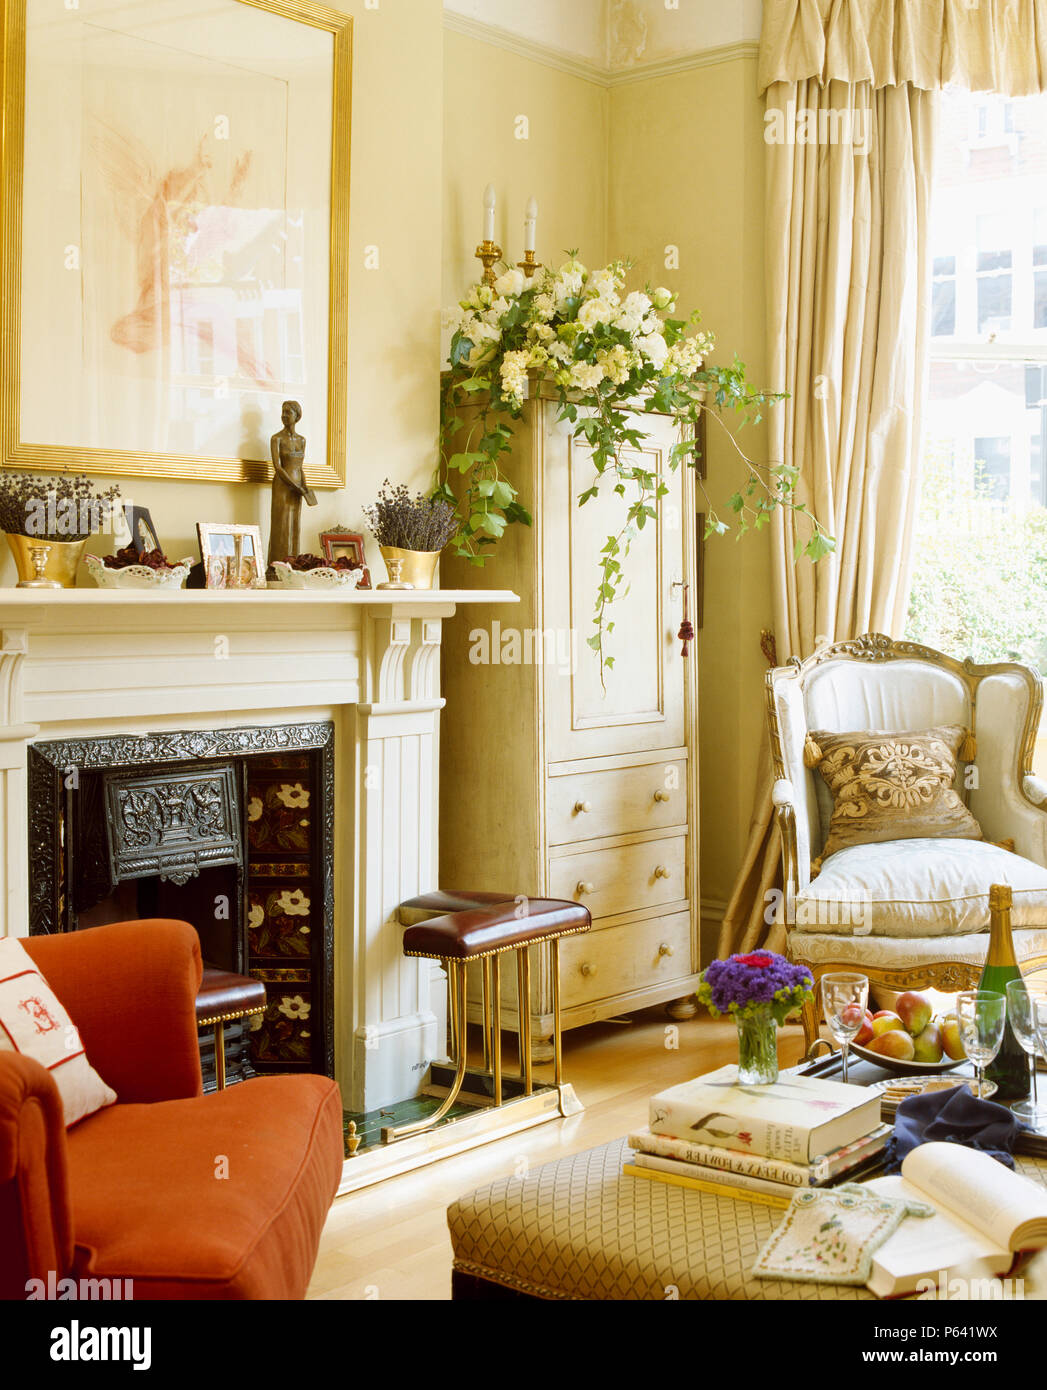 Club-fender on fireplace in cream living room with painted cupboard and cream armchair Stock Photo